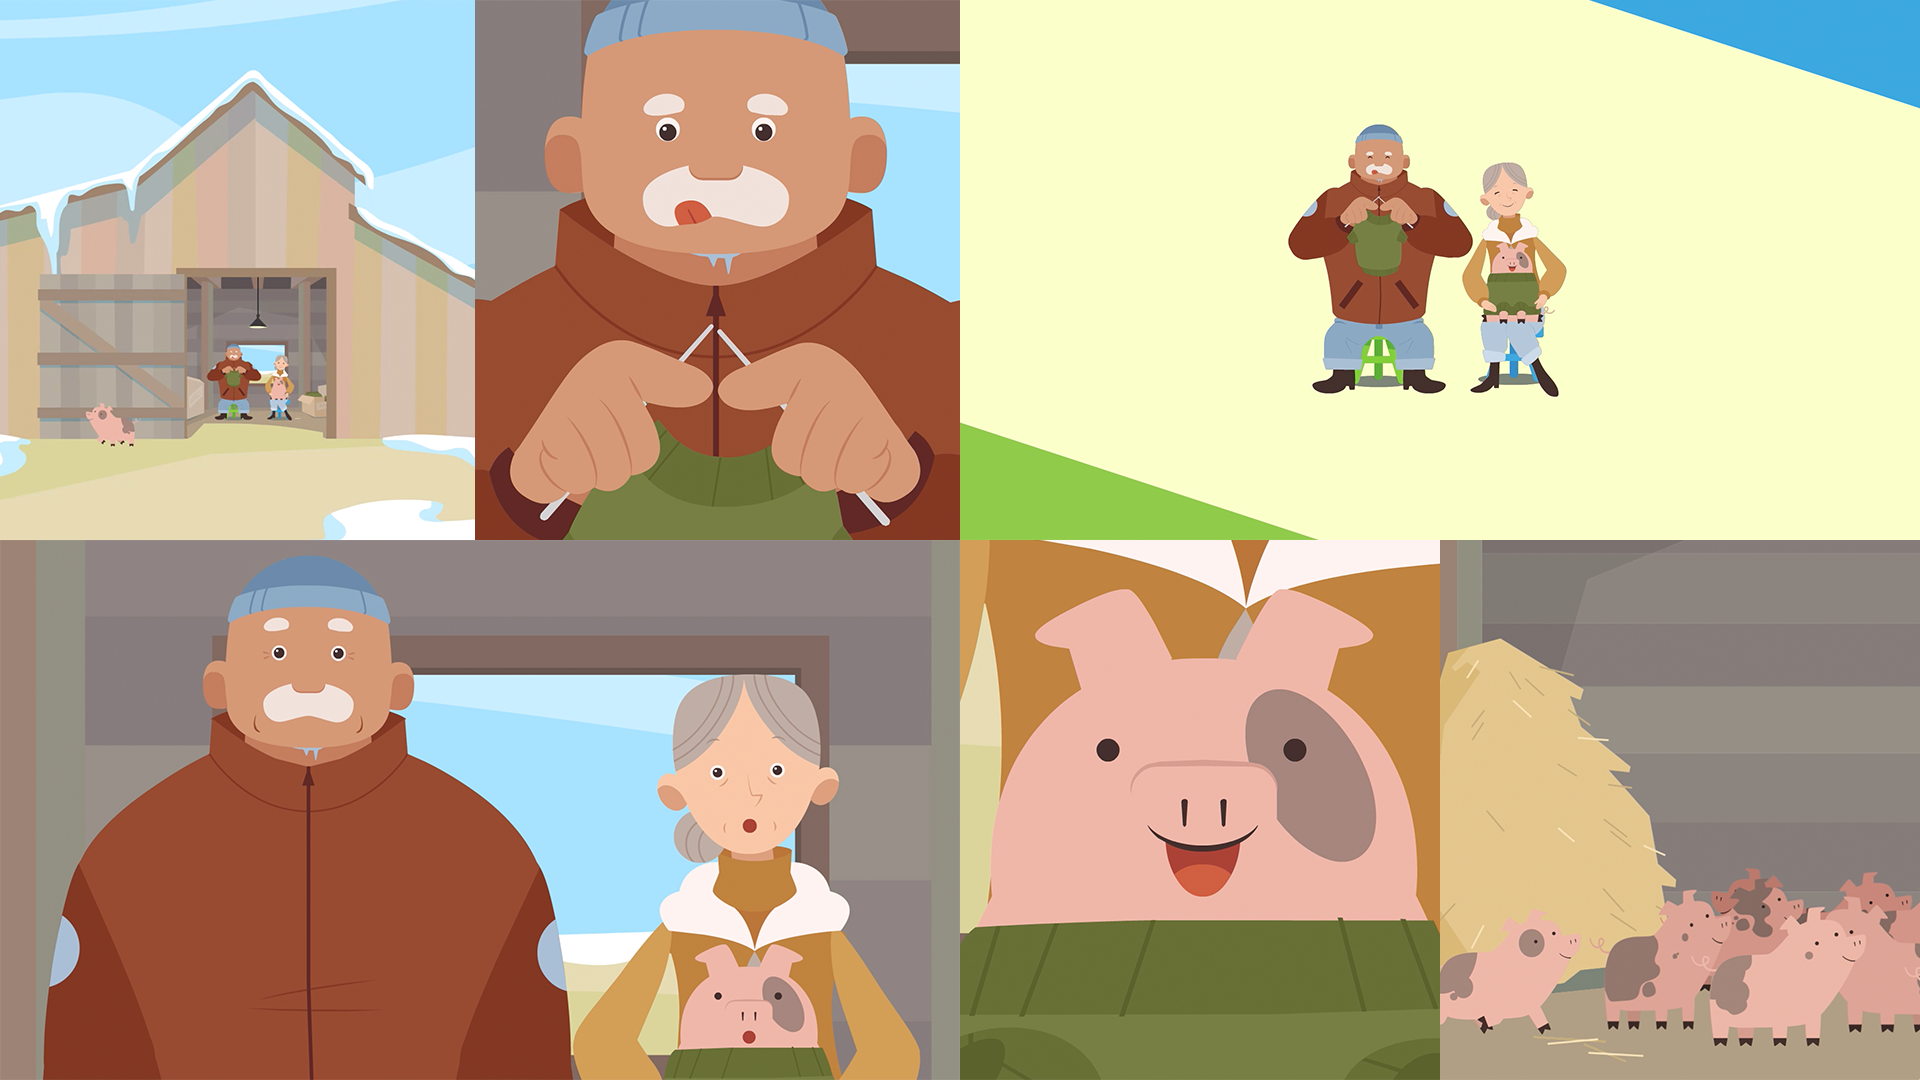 A collage of images showing motion graphic style frames from the Efficiency Manitoba Sustainable Future video featuring a pig, a farm, a elderly man knitting a sweater, and an elderly woman putting a sweater on a pig.